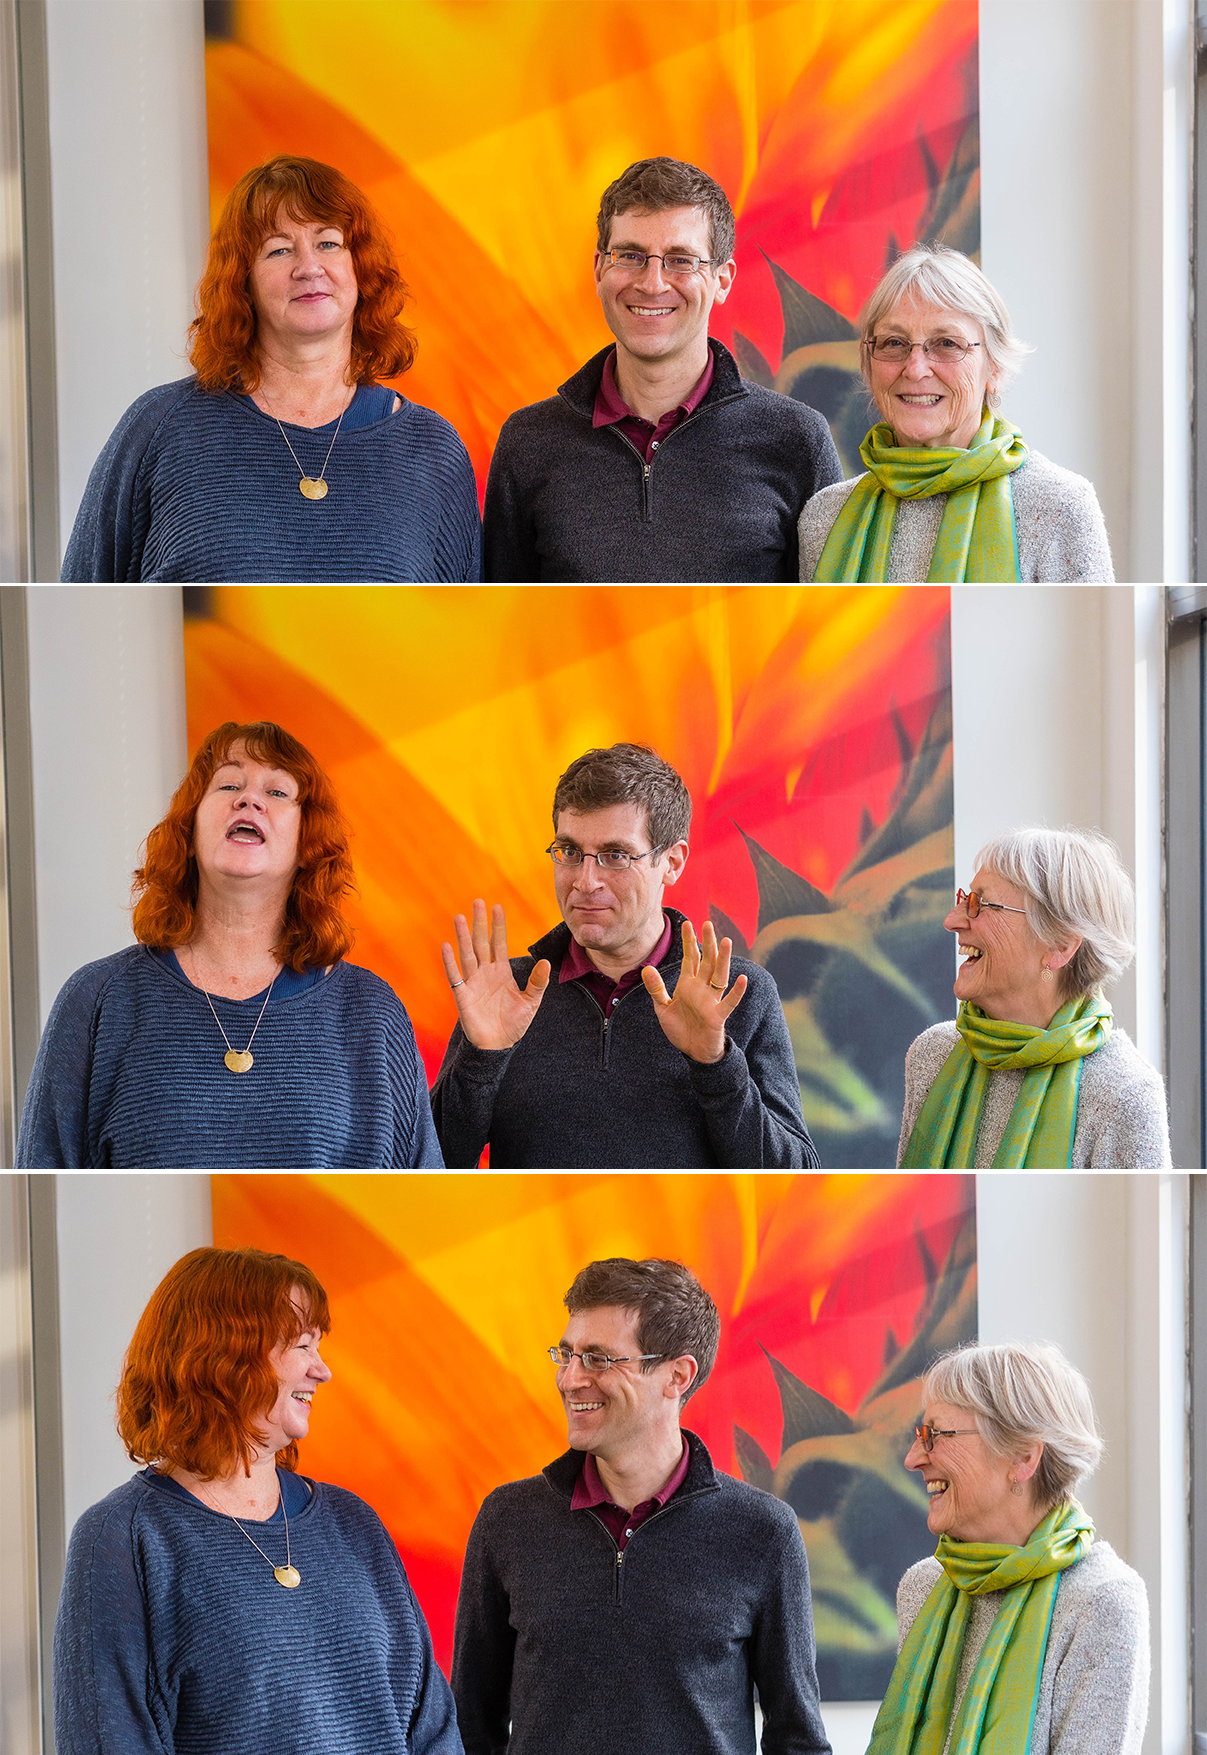 The UBC Learning Exchange leadership team facing the camera, smiling, and apparently joking around with each other. From left the picture includes Kathleen Leahy, the director, Chris Koch, the operations manager, and Angela Towle, the outgoing academic director.